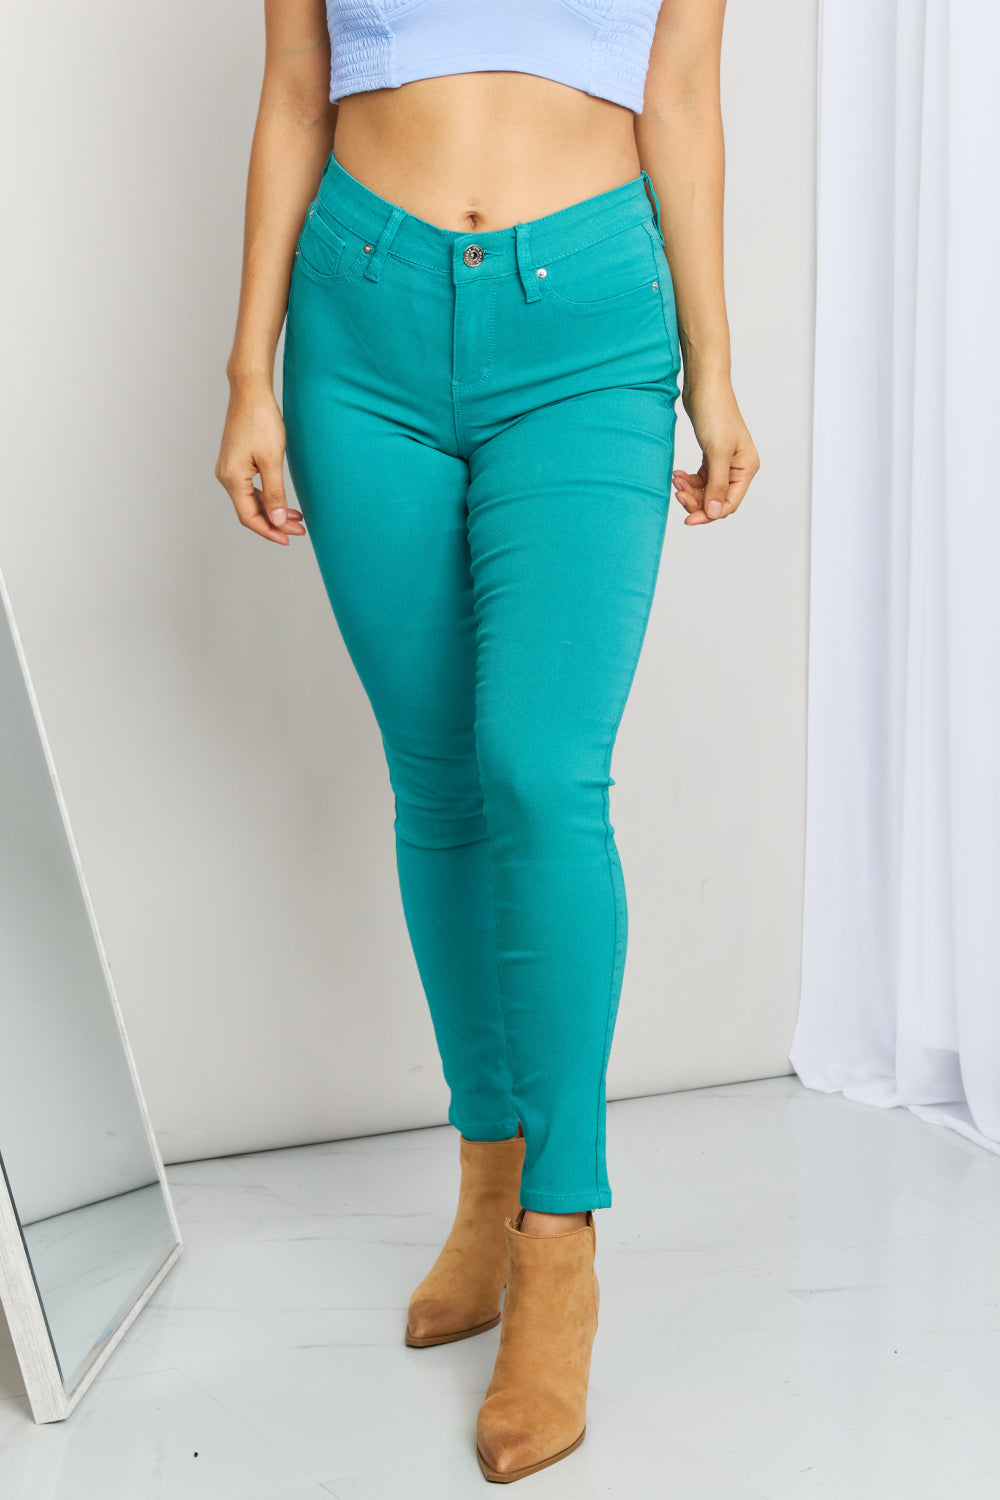 YMI Jeanswear Kate Hyper-Stretch Mid-Rise Skinny Jeans in Sea Green  Southern Soul Collectives 